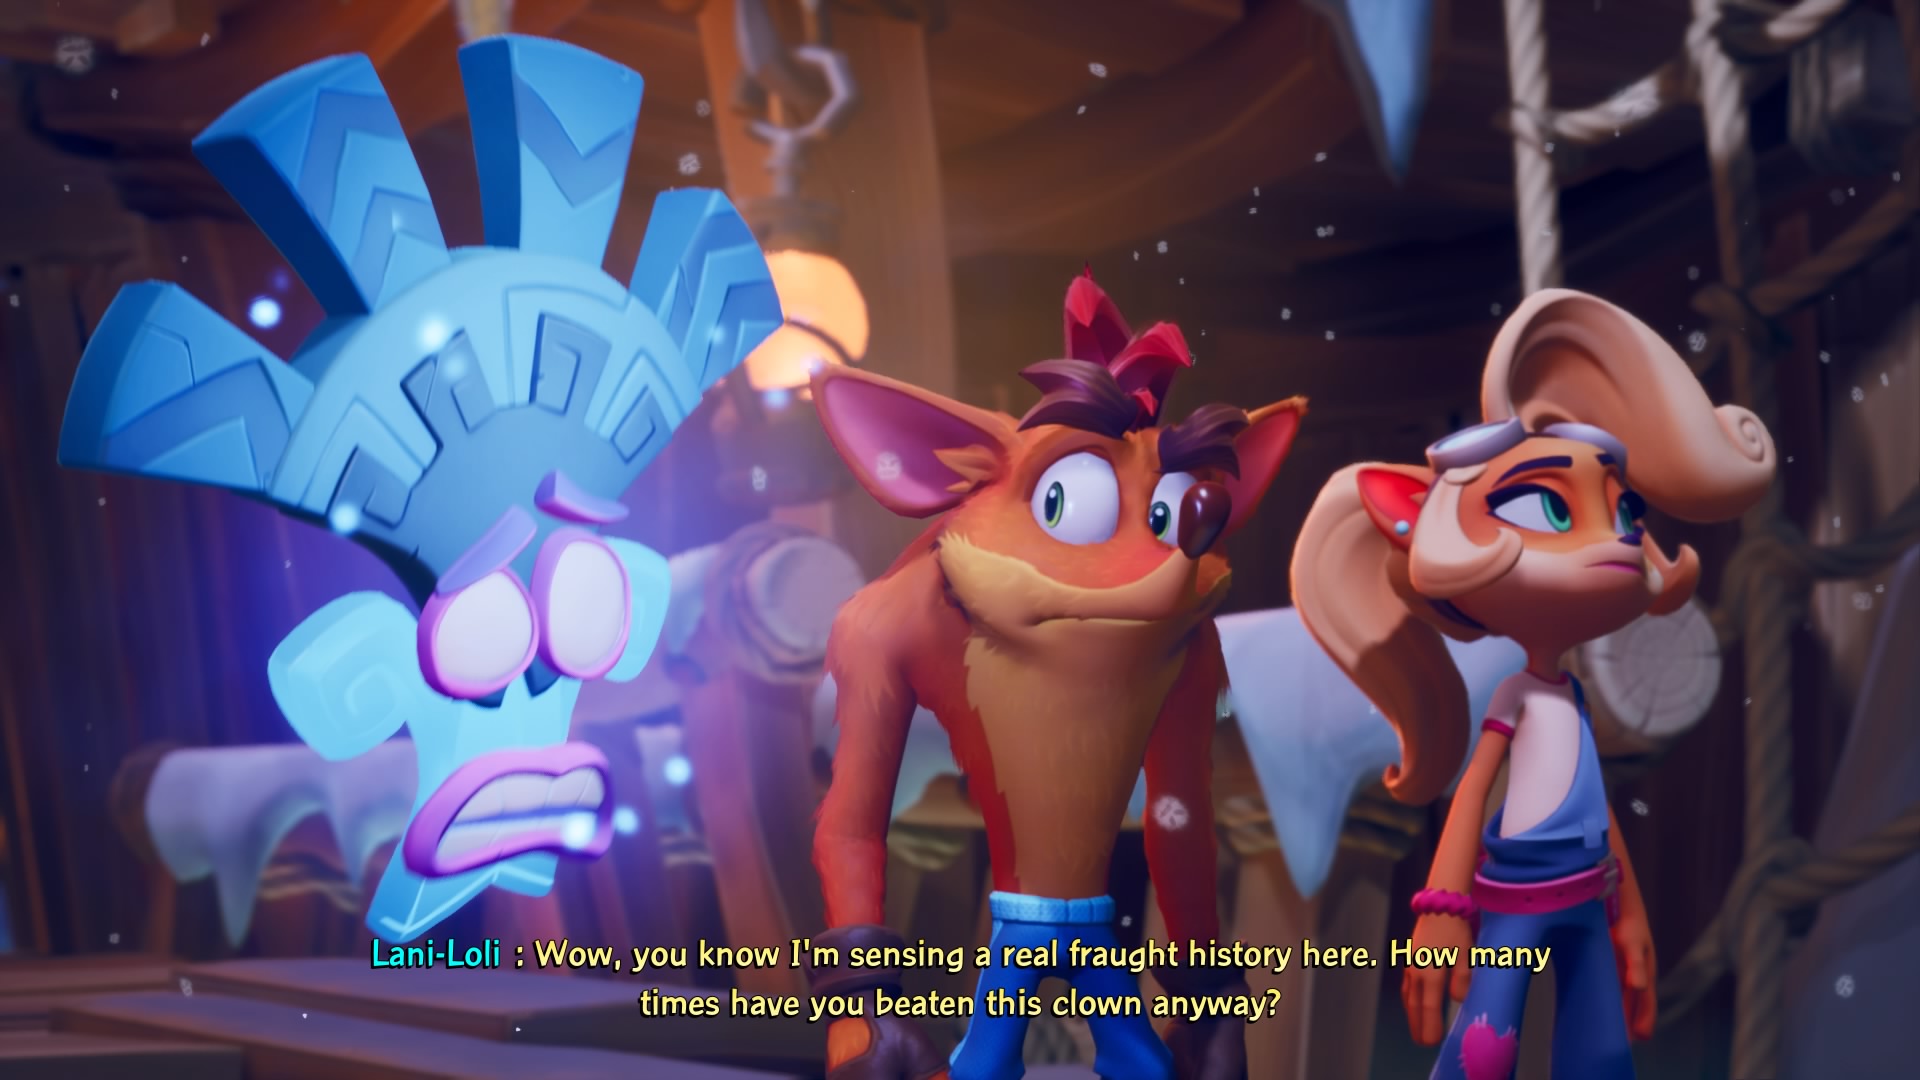 Crash Bandicoot 4: 5 Things It Does Right (& 5 It Does Wrong)